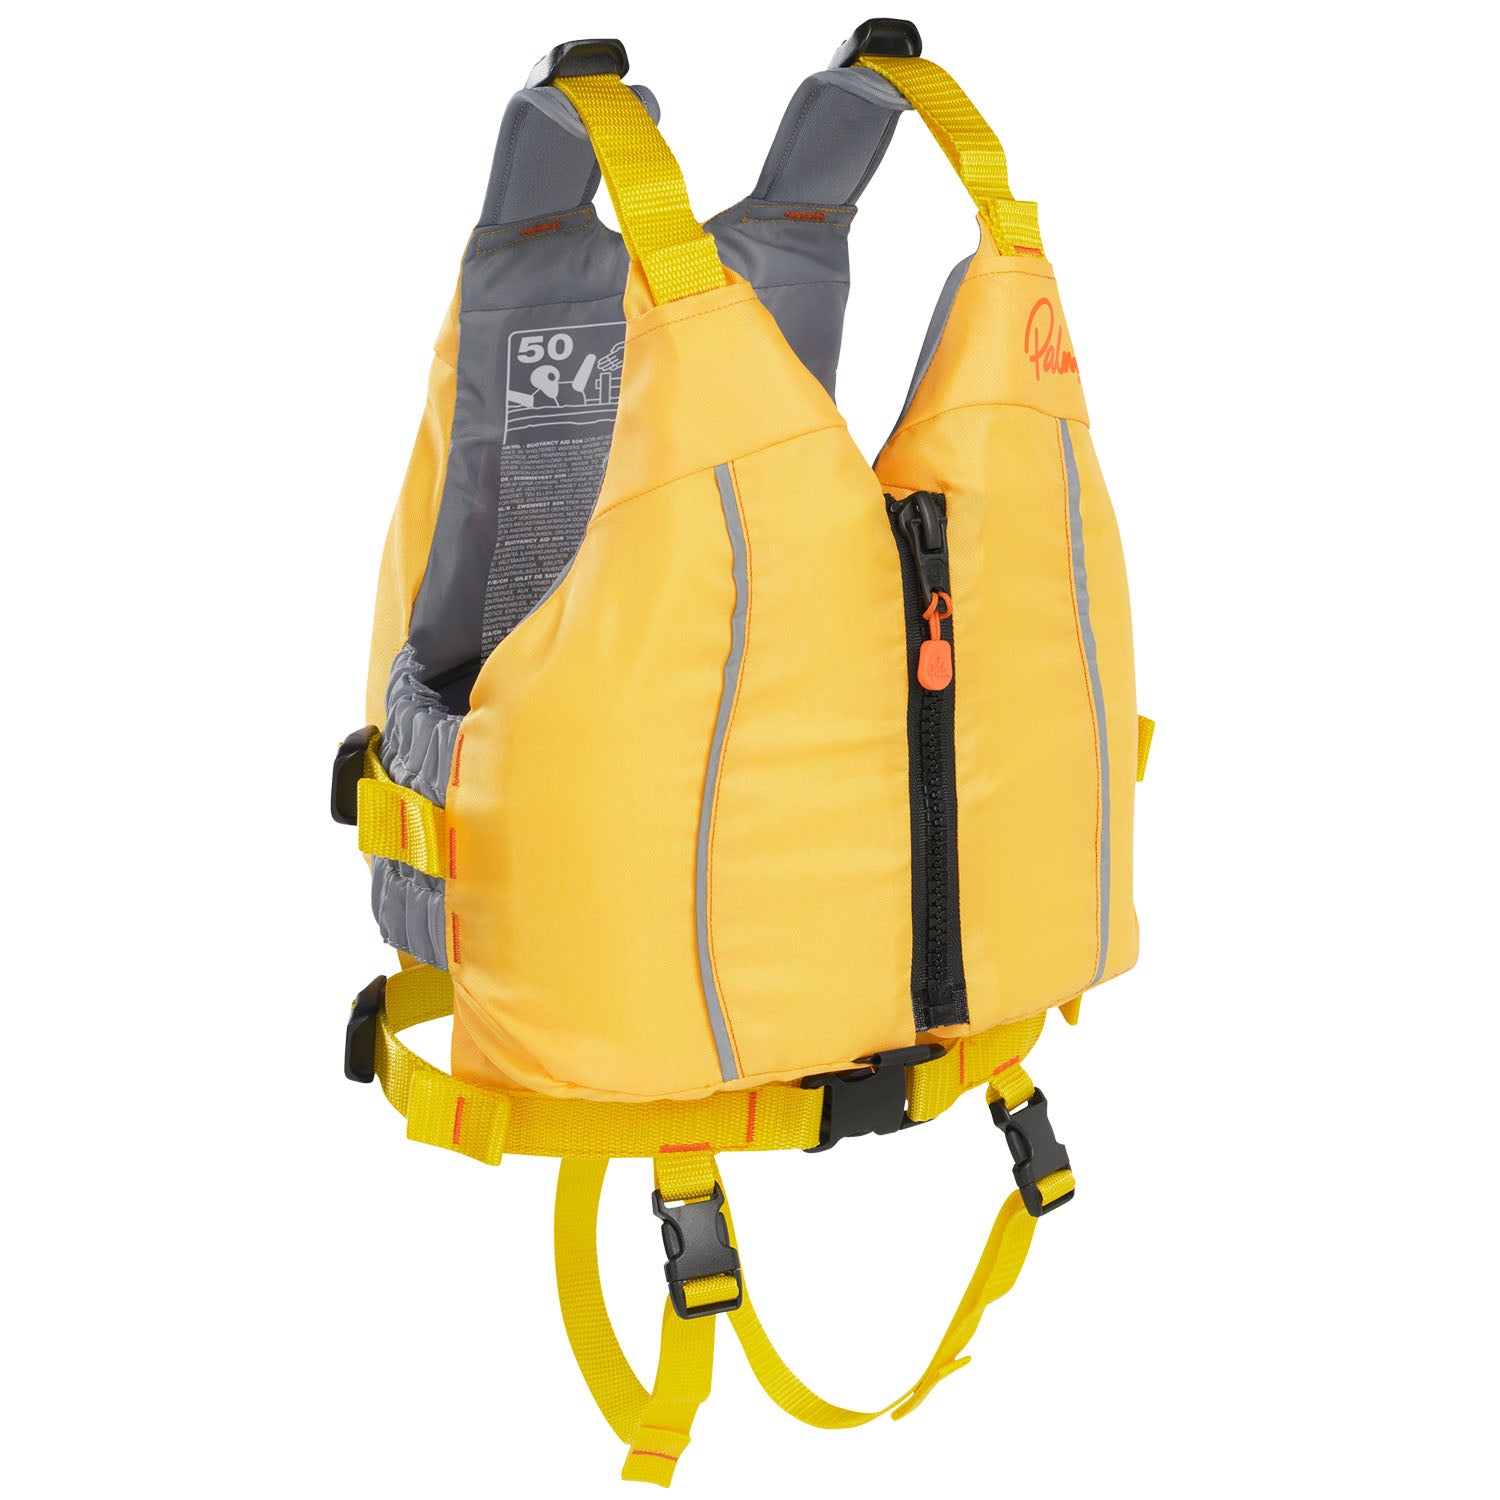 Palm Quest Kids Buoyancy Aid in Yellow for the Kids Extra Small/ Small Size